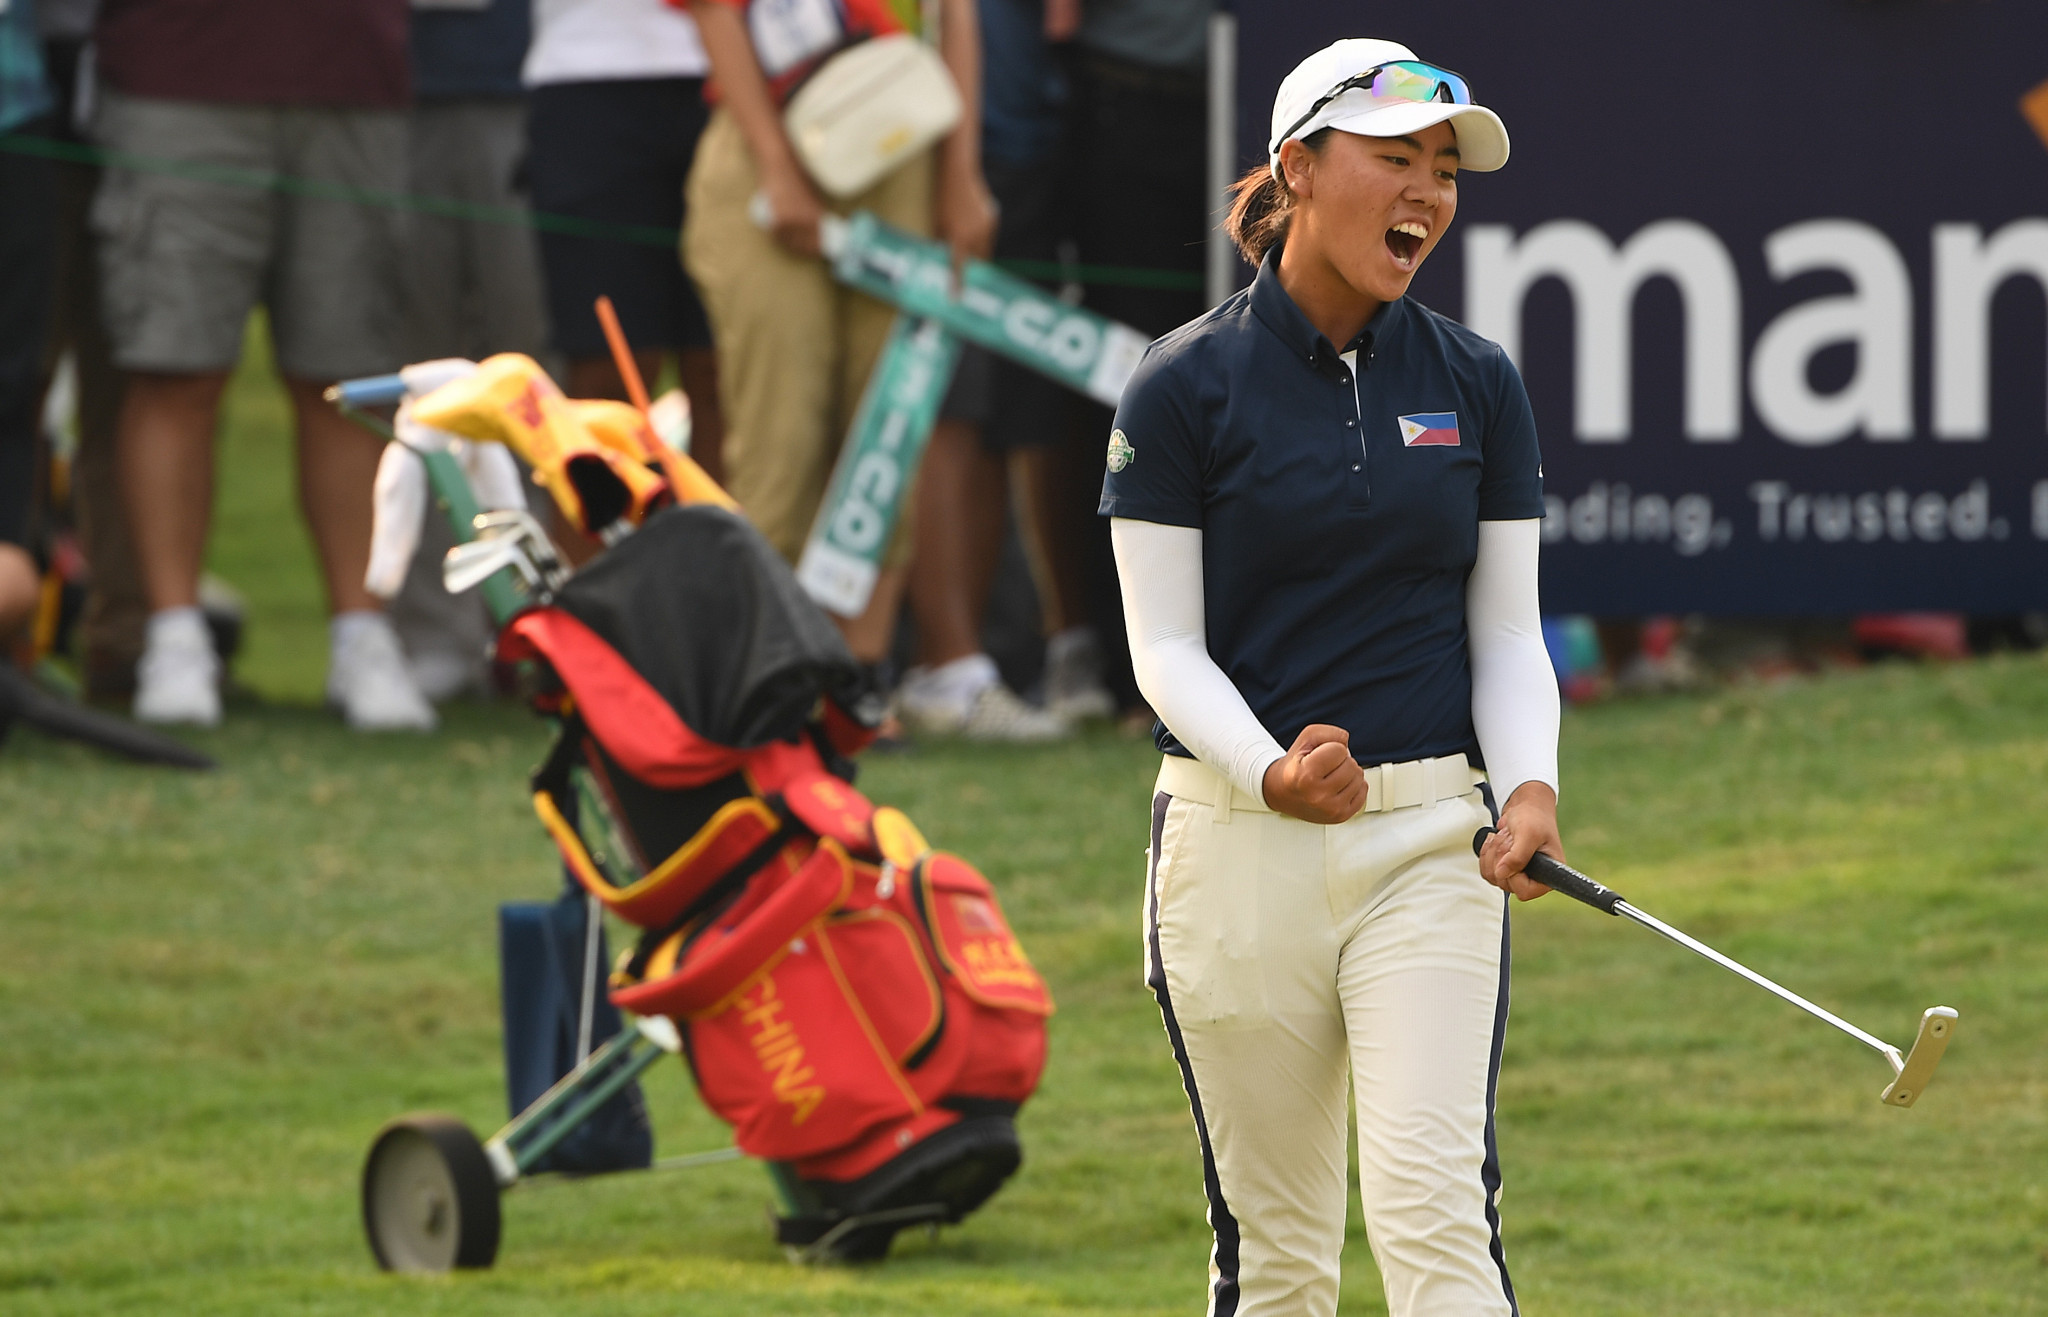 The Philippines' Yuka Saso won the women's individual golf competition after a dramatic final round at the Pondok Indah Golf and Country Club ©Getty Images